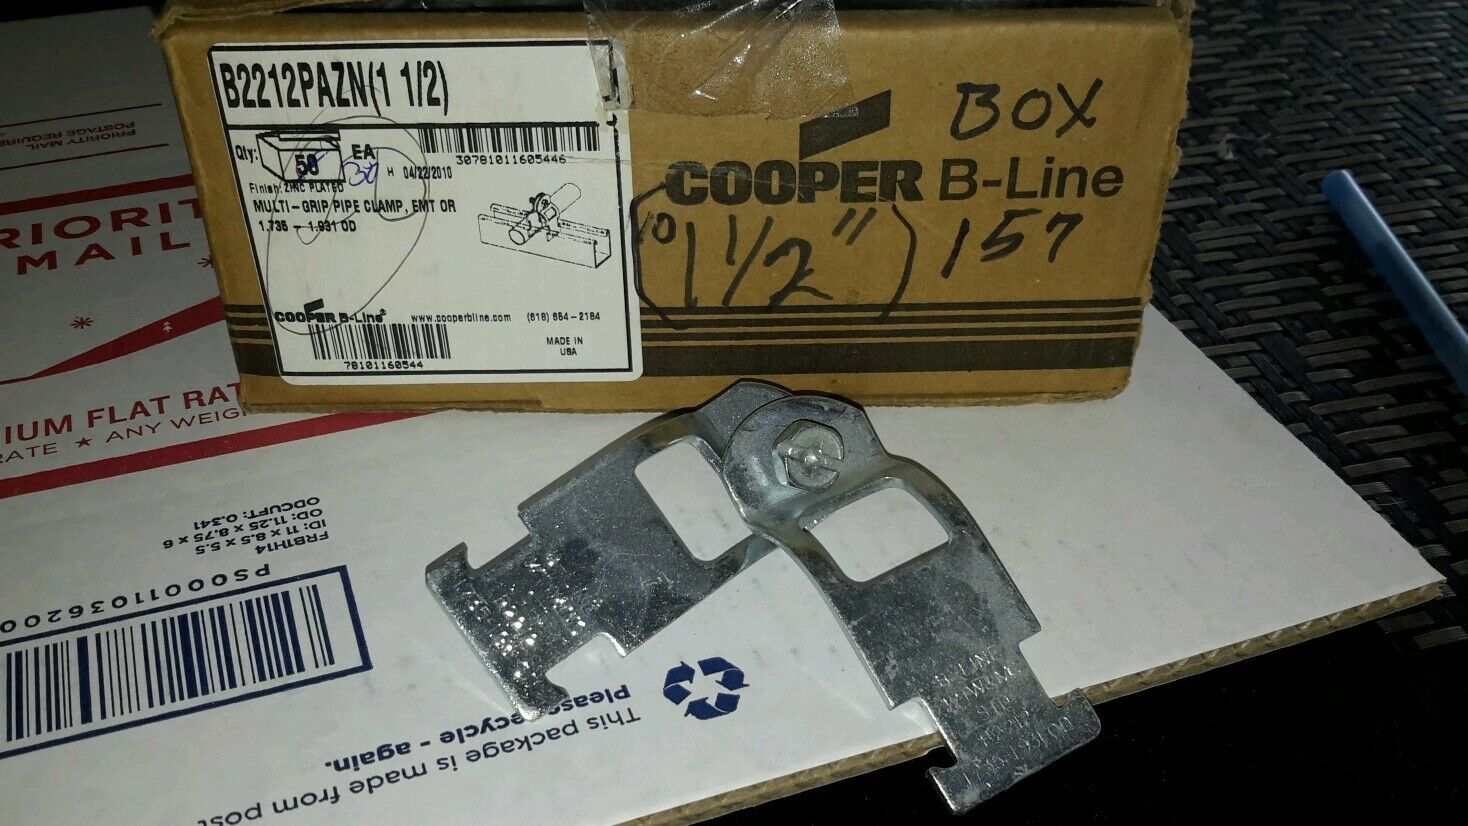 COOPER B-LINE B2212PAZN 1 1/2" MULTI GRIP PIPE CLAMP EMT OR 1.735 LOT OF 30 NEW - $14.36